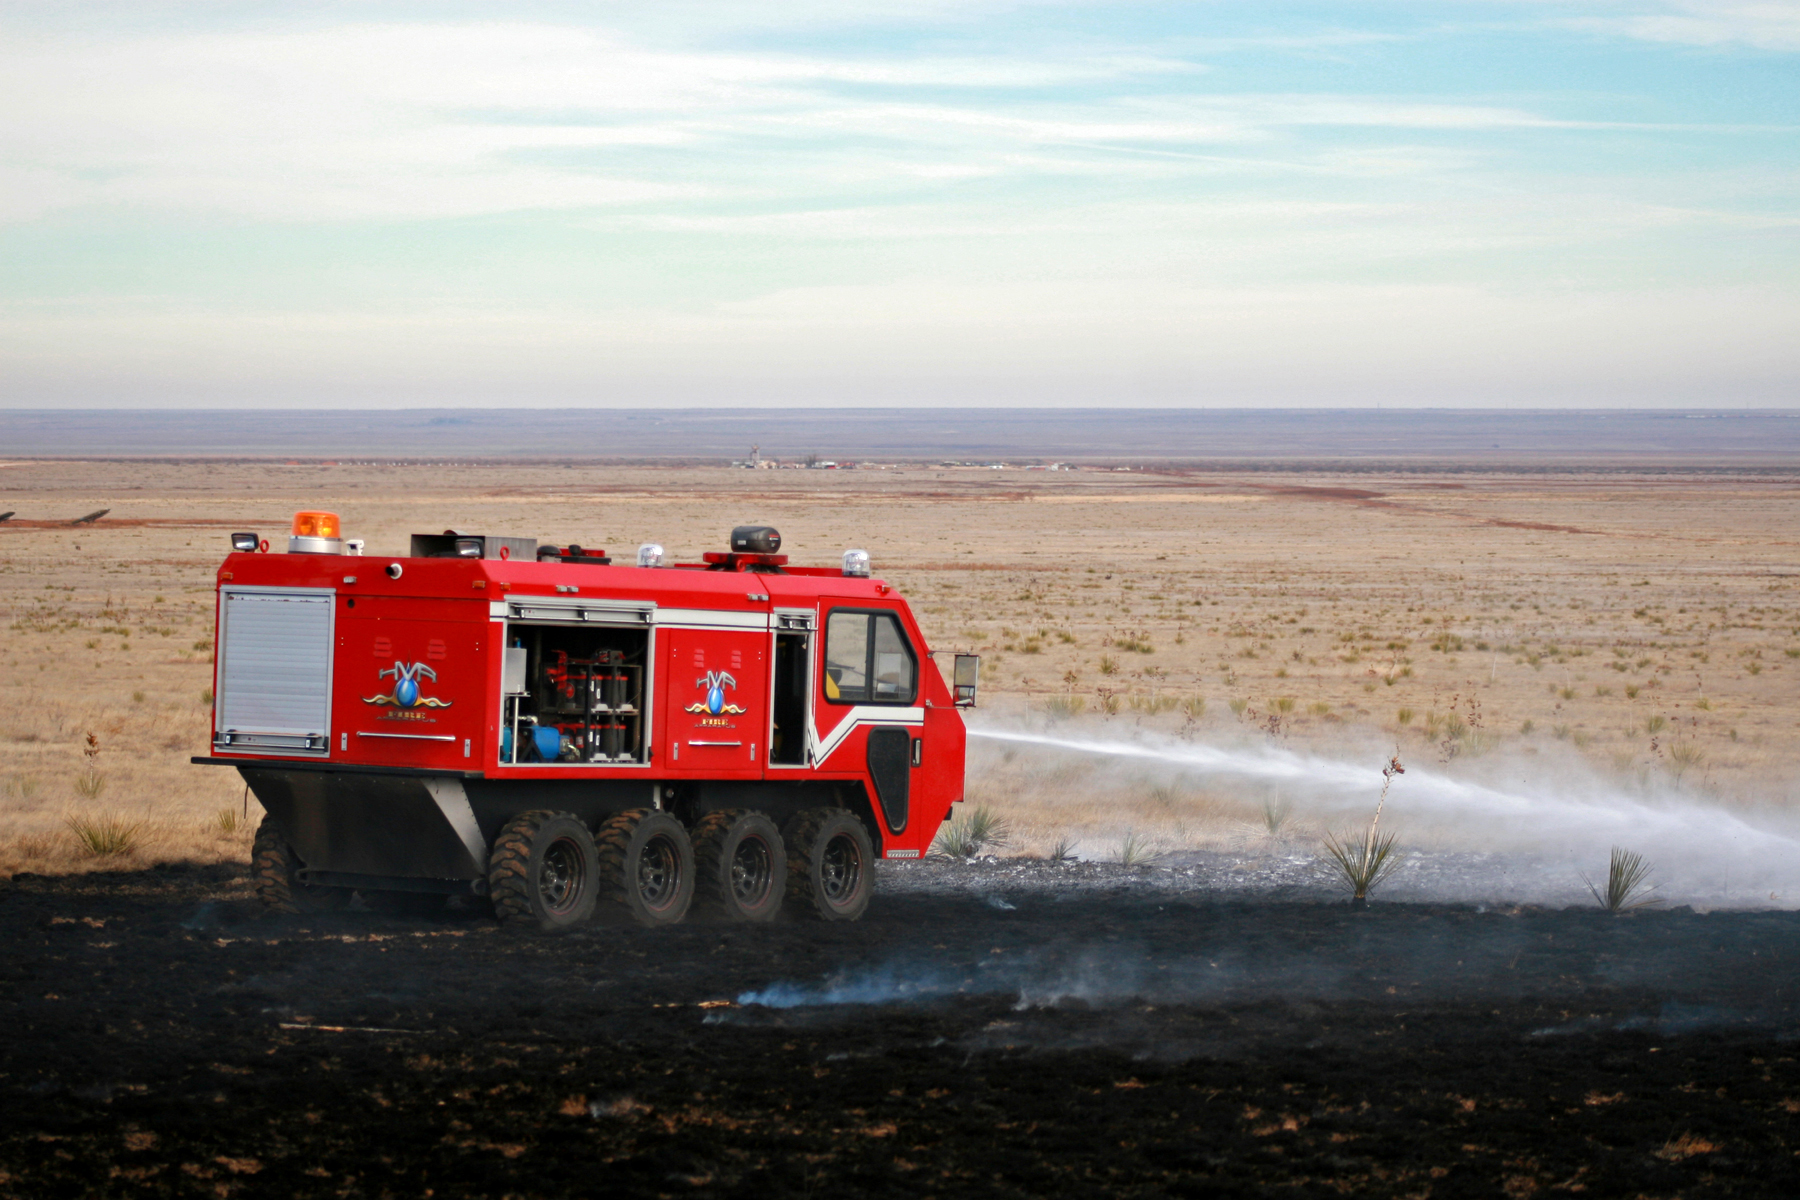 HMA’s fire-suppression technology is ideal for a host of firefighting applications, including combating wildfires in areas unreachable by standard fire trucks. Here, HMA’s L3 (light, lean, and lethal) vehicle demonstrates these capabilities.